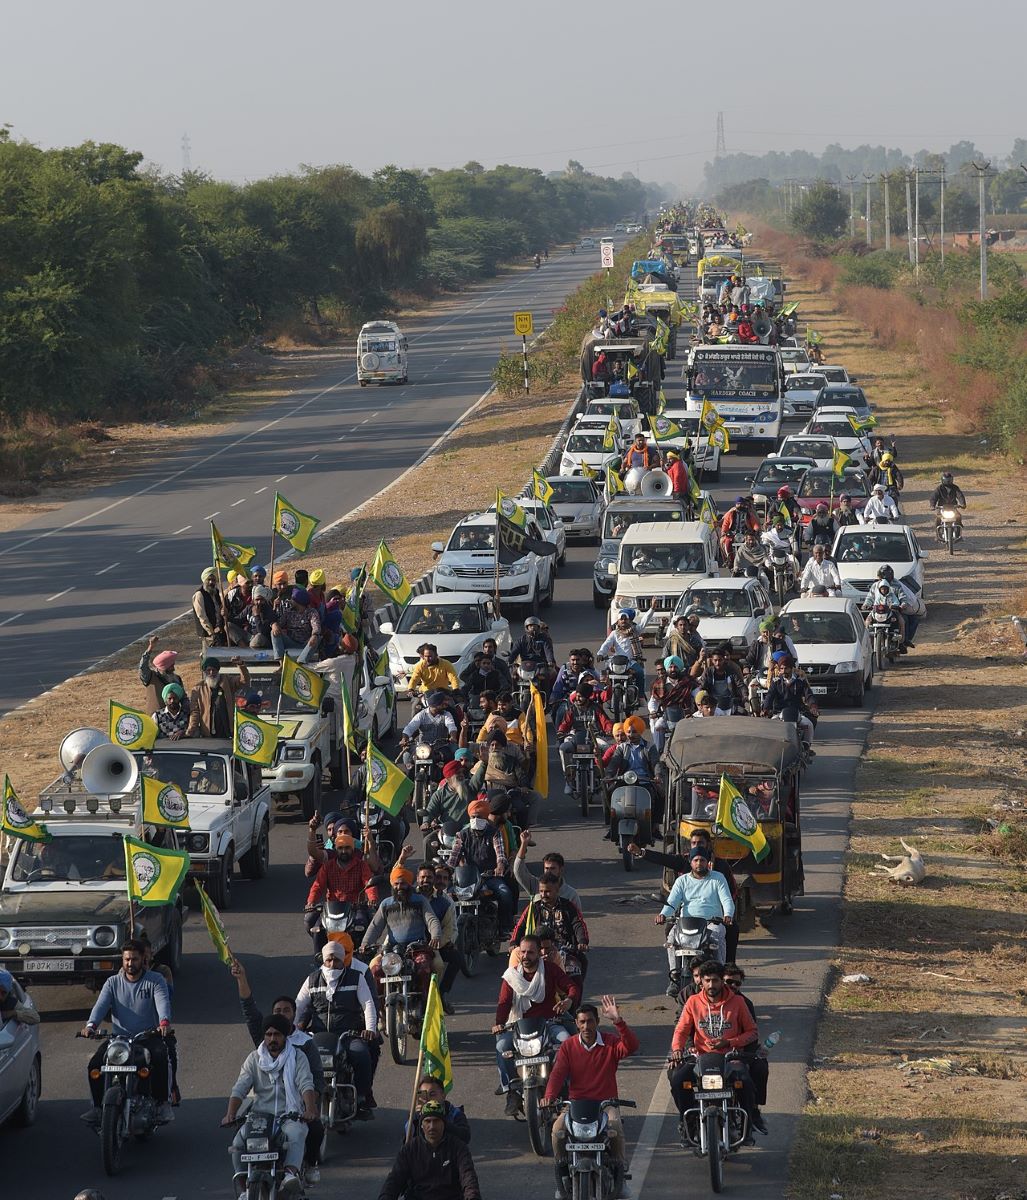 A convoy of people with green and yellow flags occupies a lane of highway flanked by dry grass. People driving motorcycles are in the front, and behind them are rows of white cars and trucks.